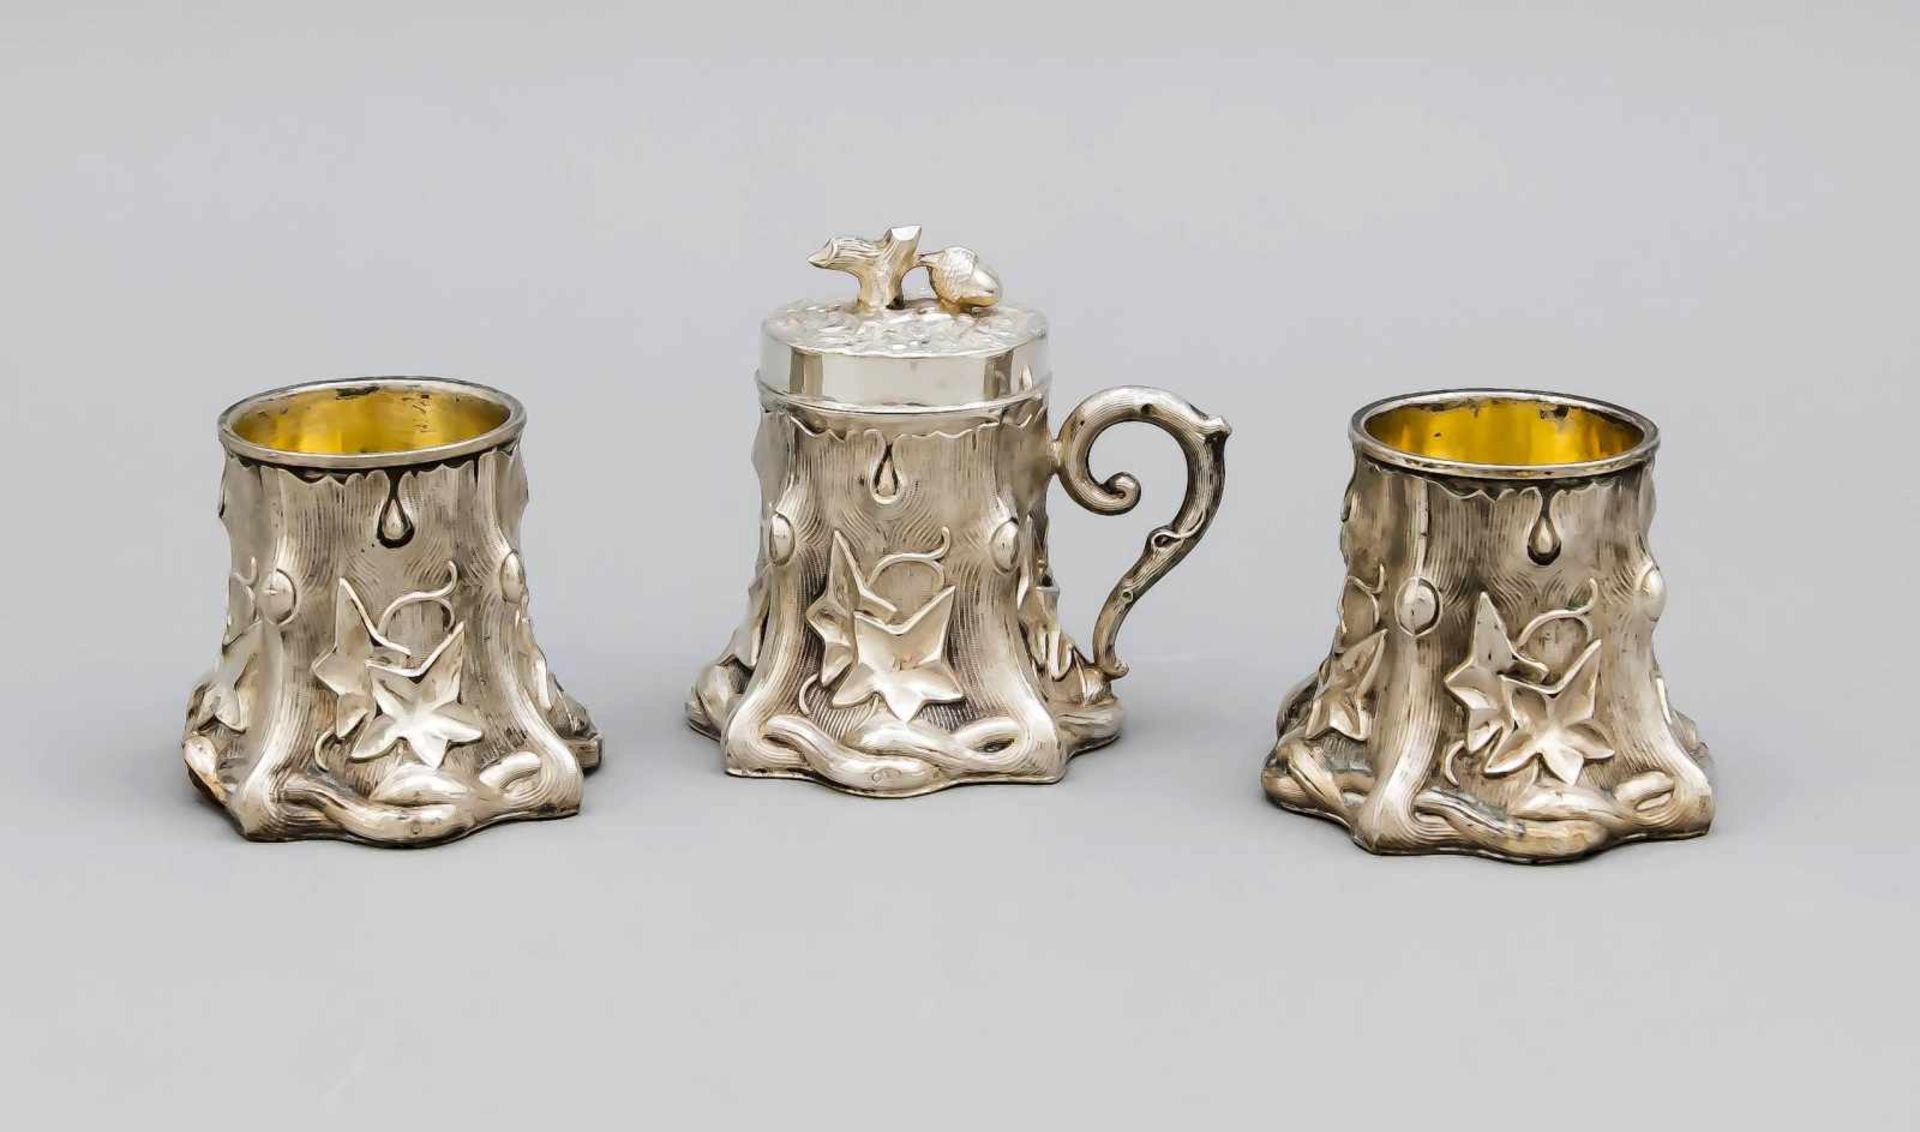 Three-piece spice set, around 1900, silver tested, partly gilded interior, 2 bowls and 1